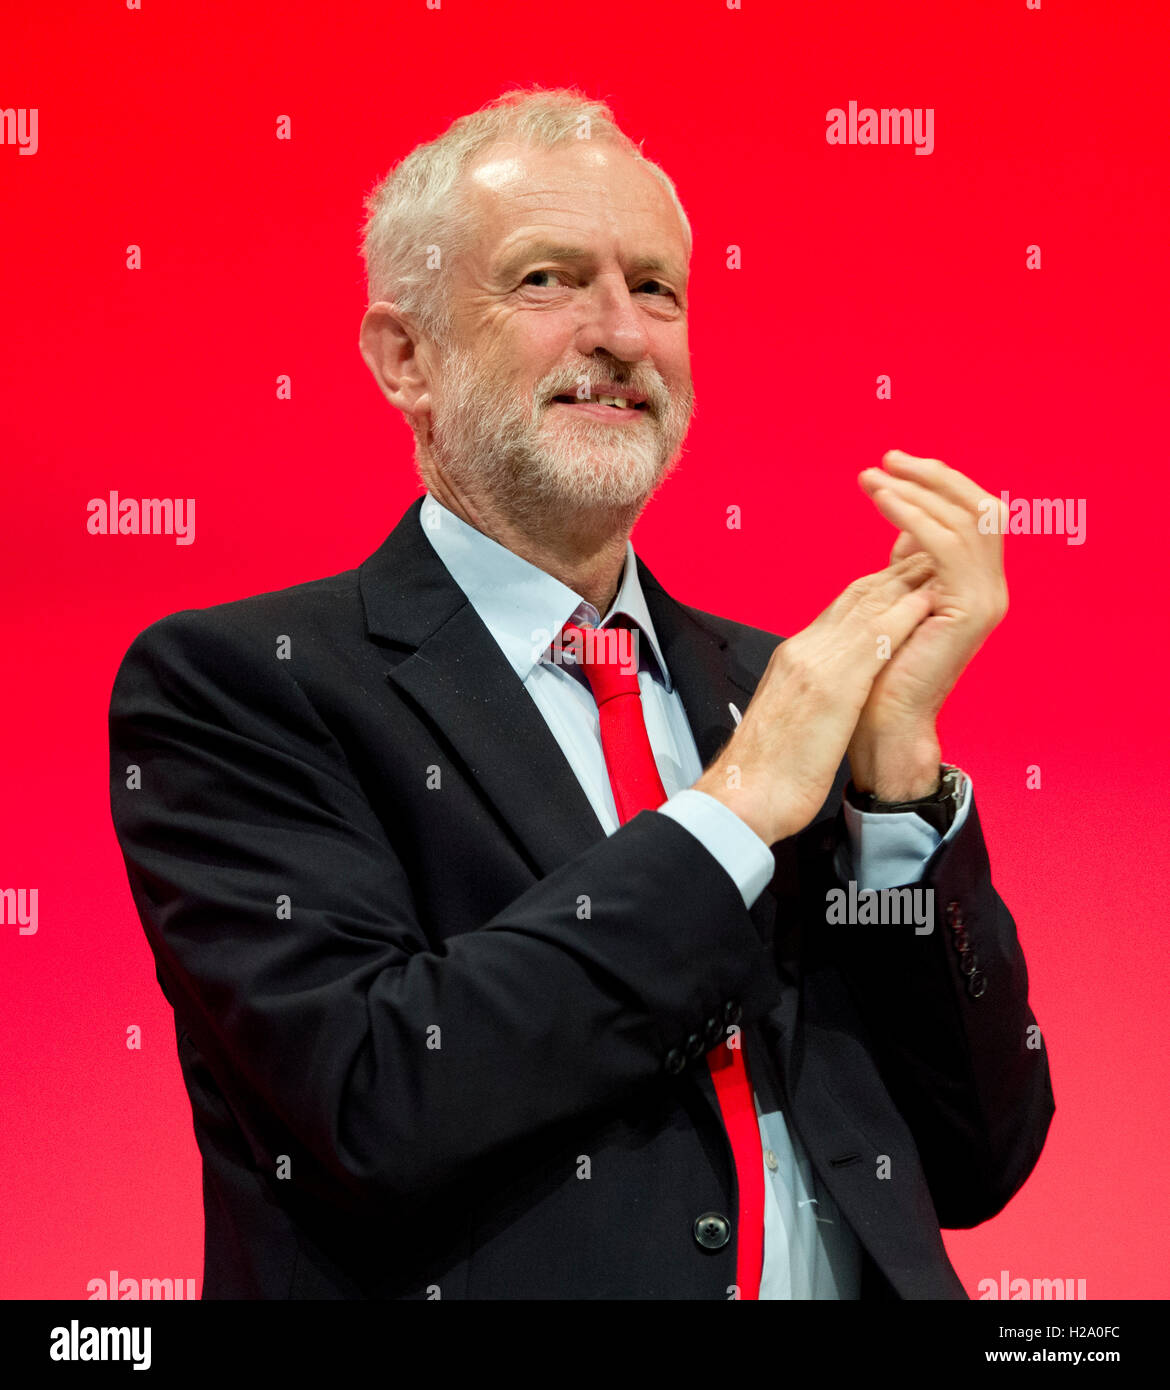 Liverpool, UK. 26th September 2016. Labour leader Jeremy Corbyn applauds during day two of the Labour Party Conference in Liverpool. Credit:  Russell Hart/Alamy Live News. Stock Photo